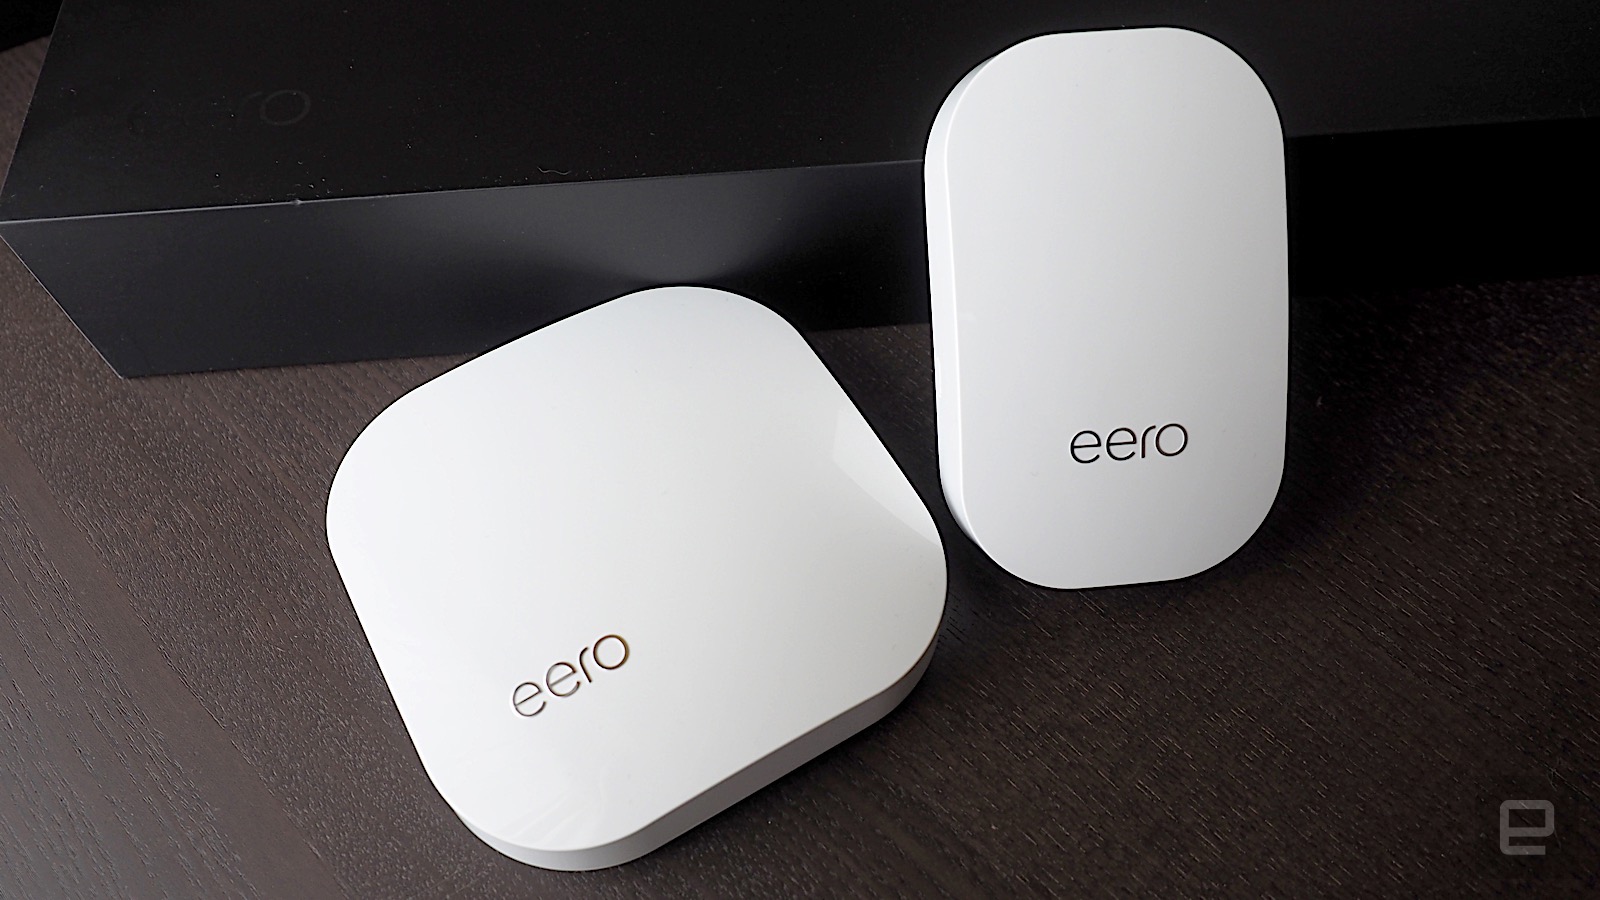 Eero will upgrade mesh WiFi routers to bolster the Matter enticing home fashioned